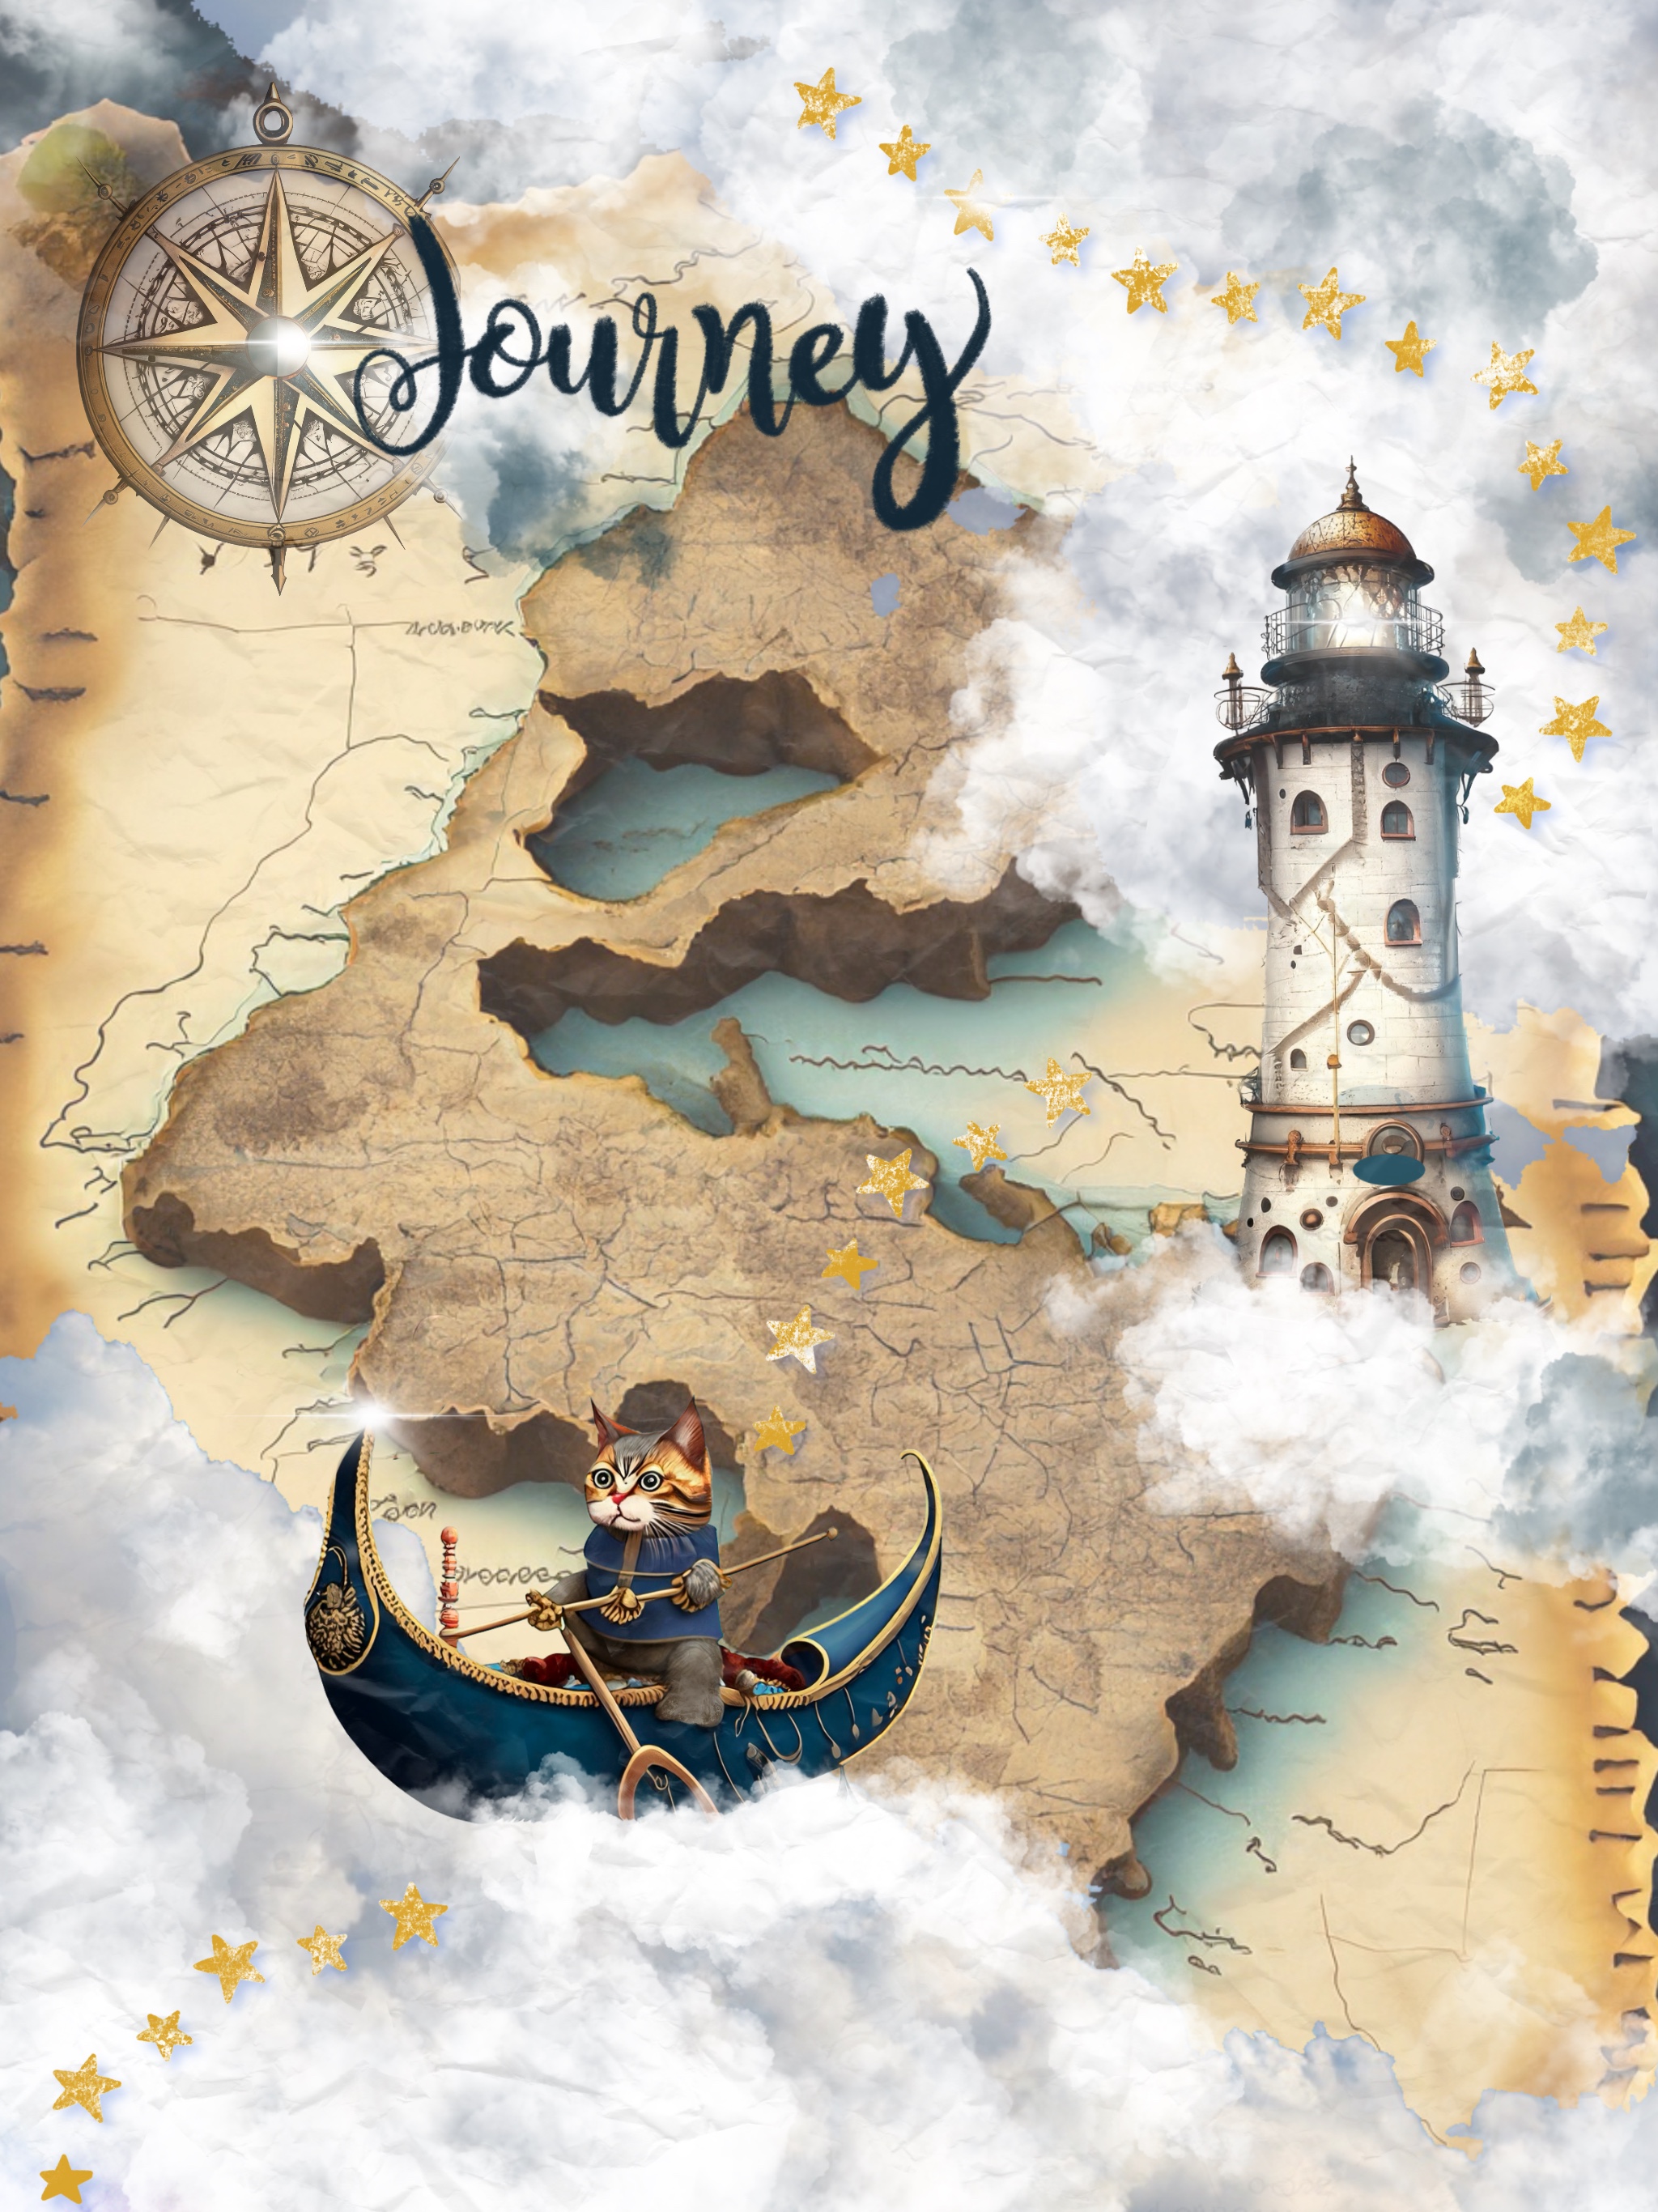 Journey digital collage with map, cat in boat, lighthouse, compass rose